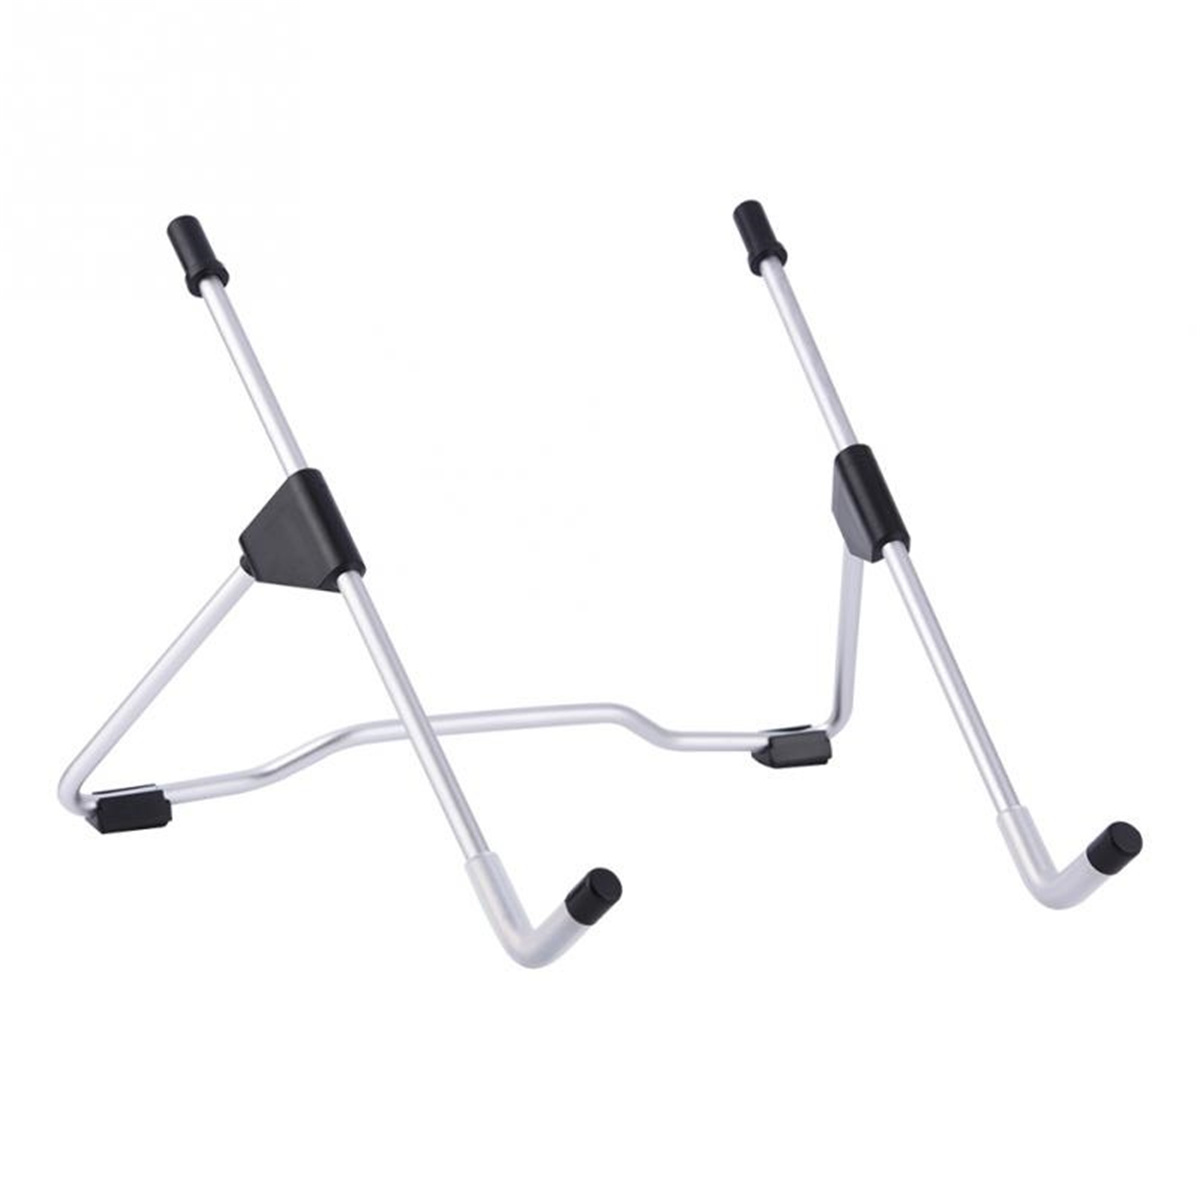 

Aluminum Alloy Adjustable Foldable Cooling Stand Holder For iPad/Macbook/Tablet/Laptop